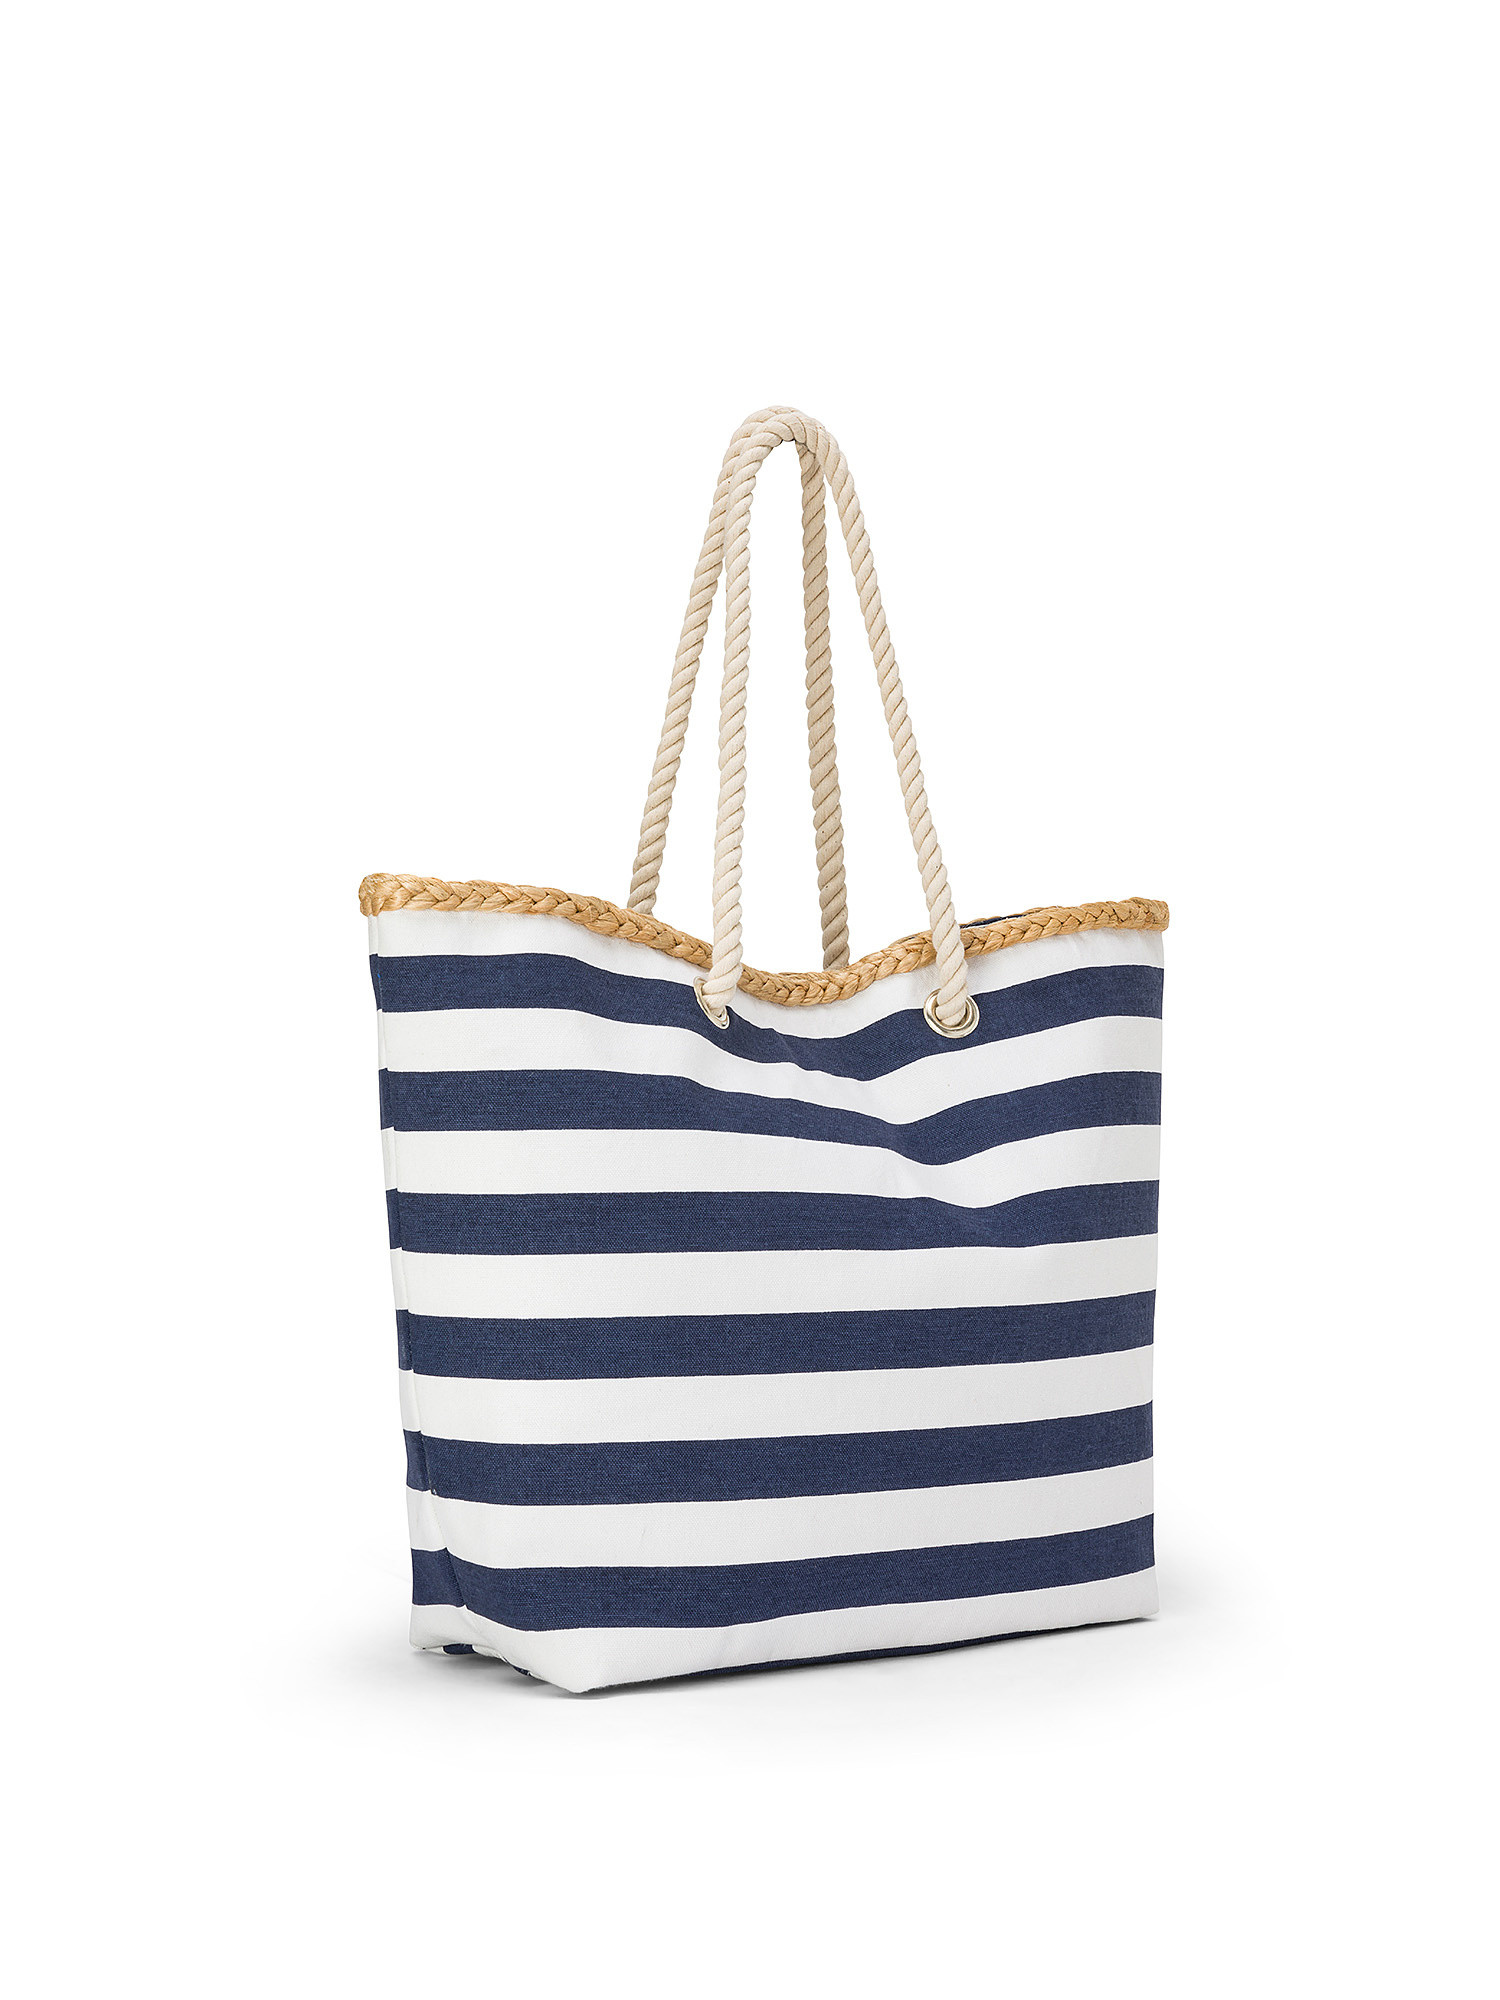 Shopping bag a righe marinare, Blu, large image number 1